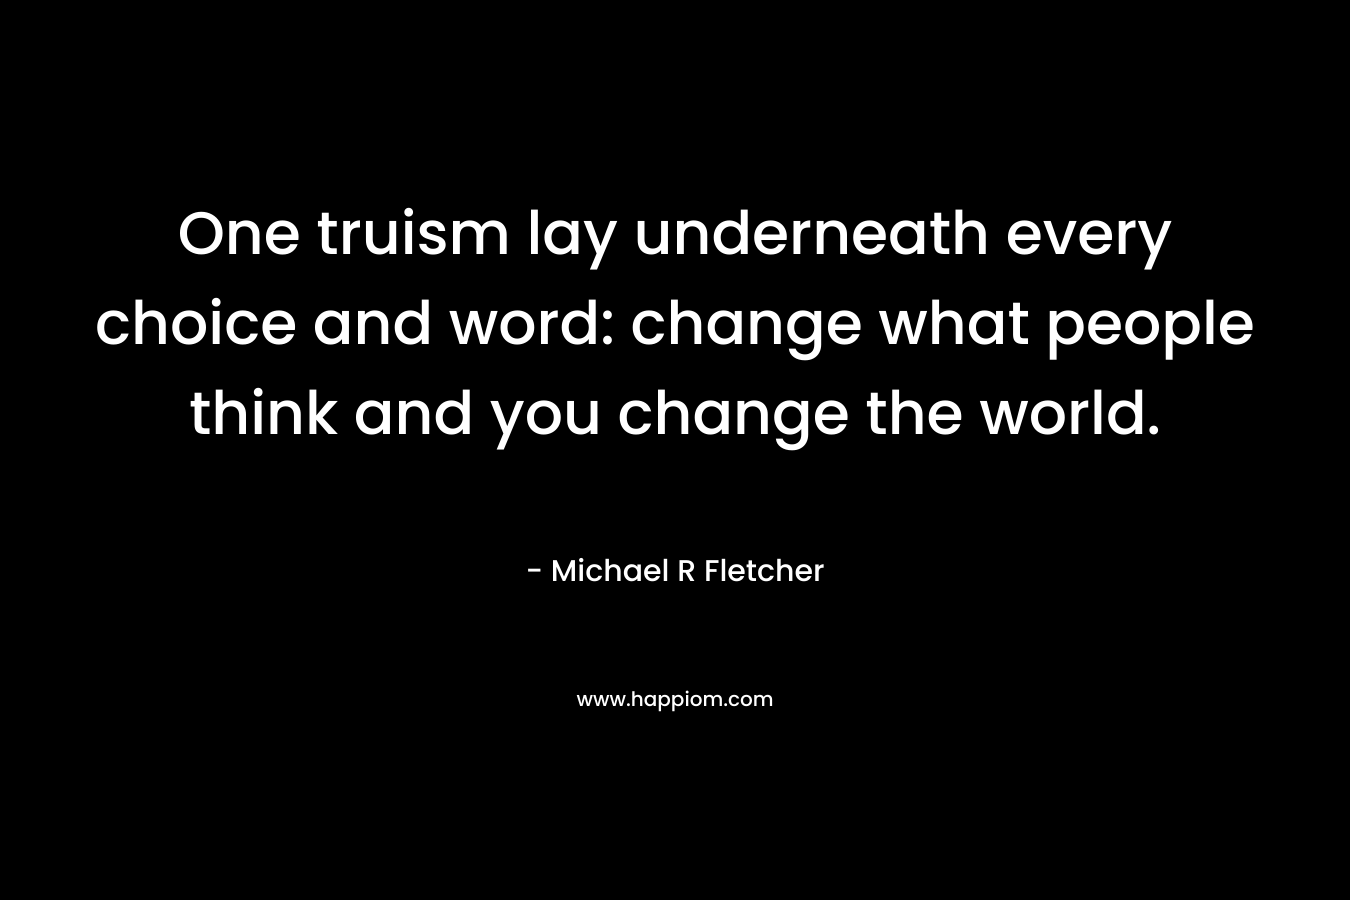 One truism lay underneath every choice and word: change what people think and you change the world.